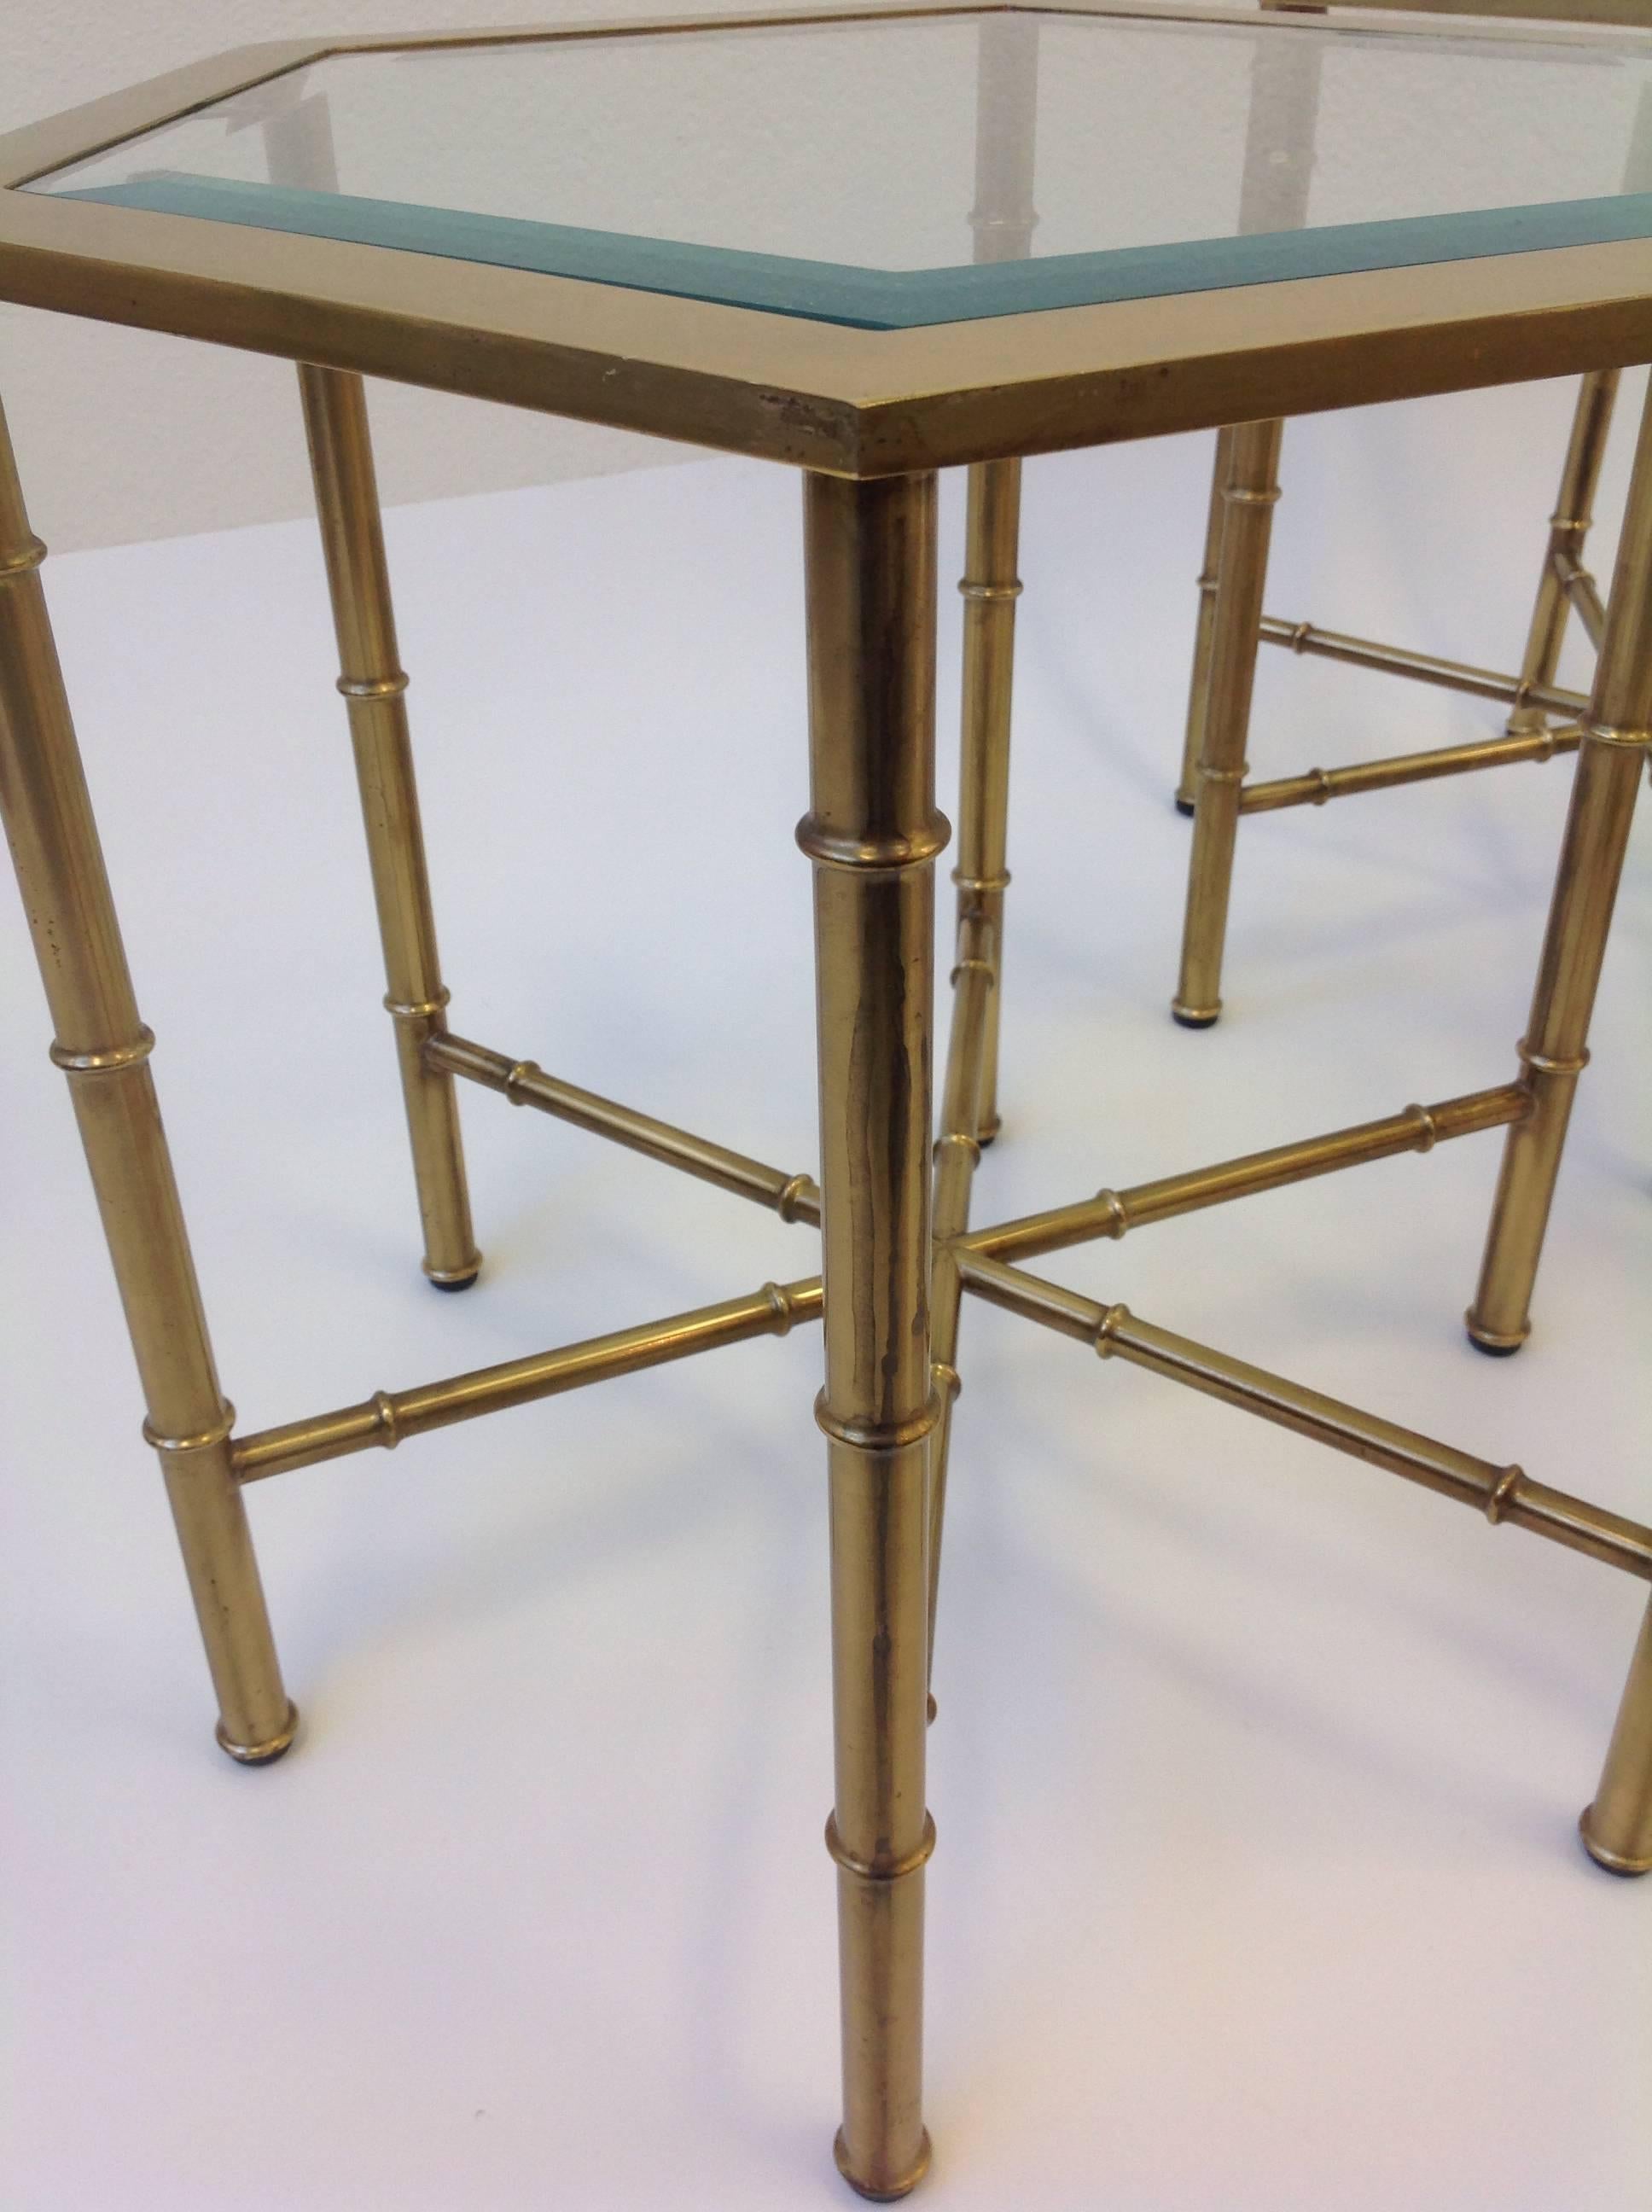 Set of Four Aged Brass and Glass Hexagonal Side Tables by Mastercraft 1